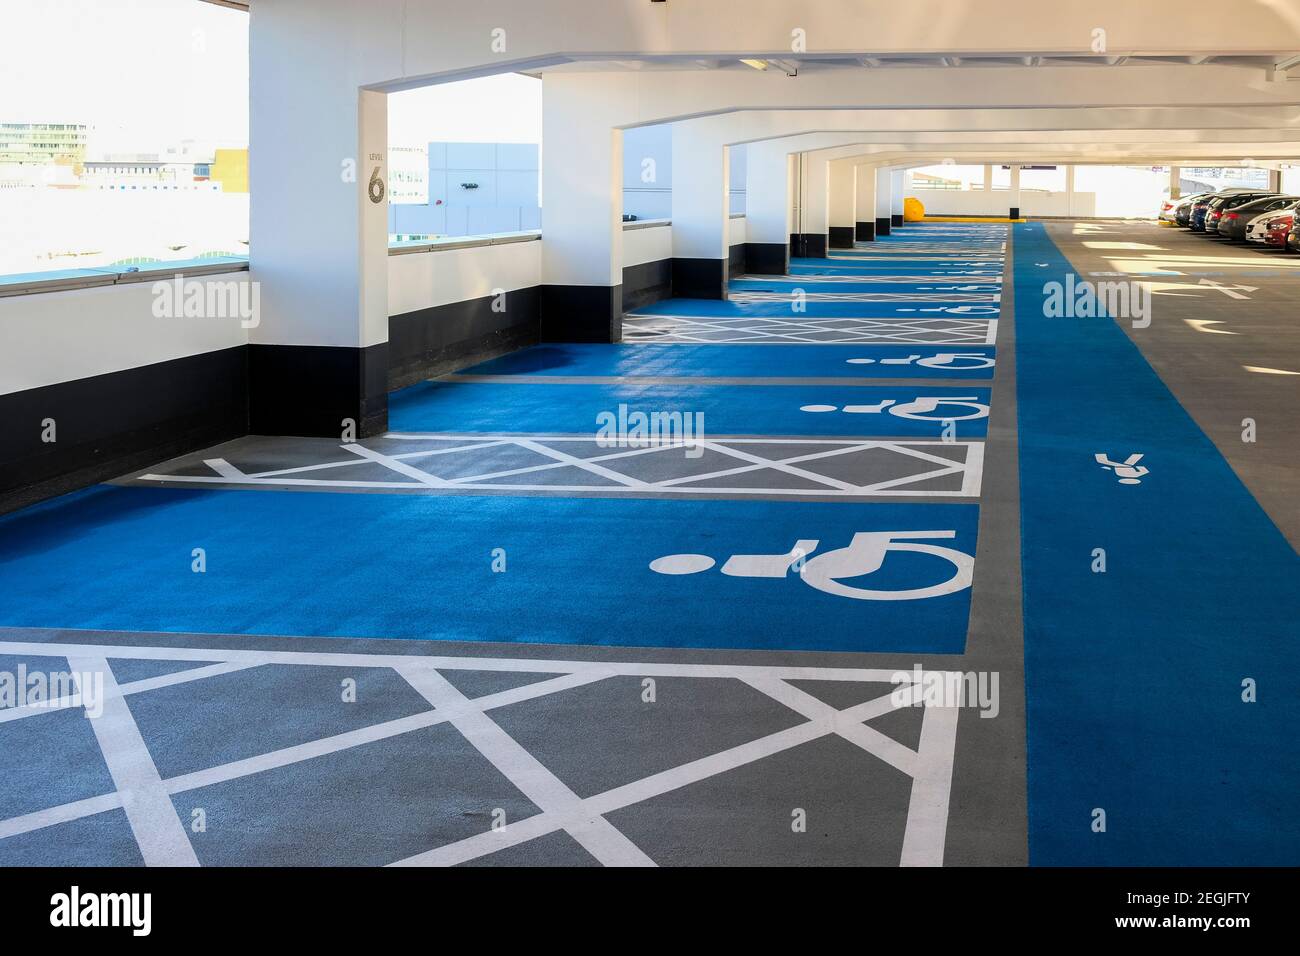 Disabled parking bays and pedestrian walkway in a multi storey car park Stock Photo